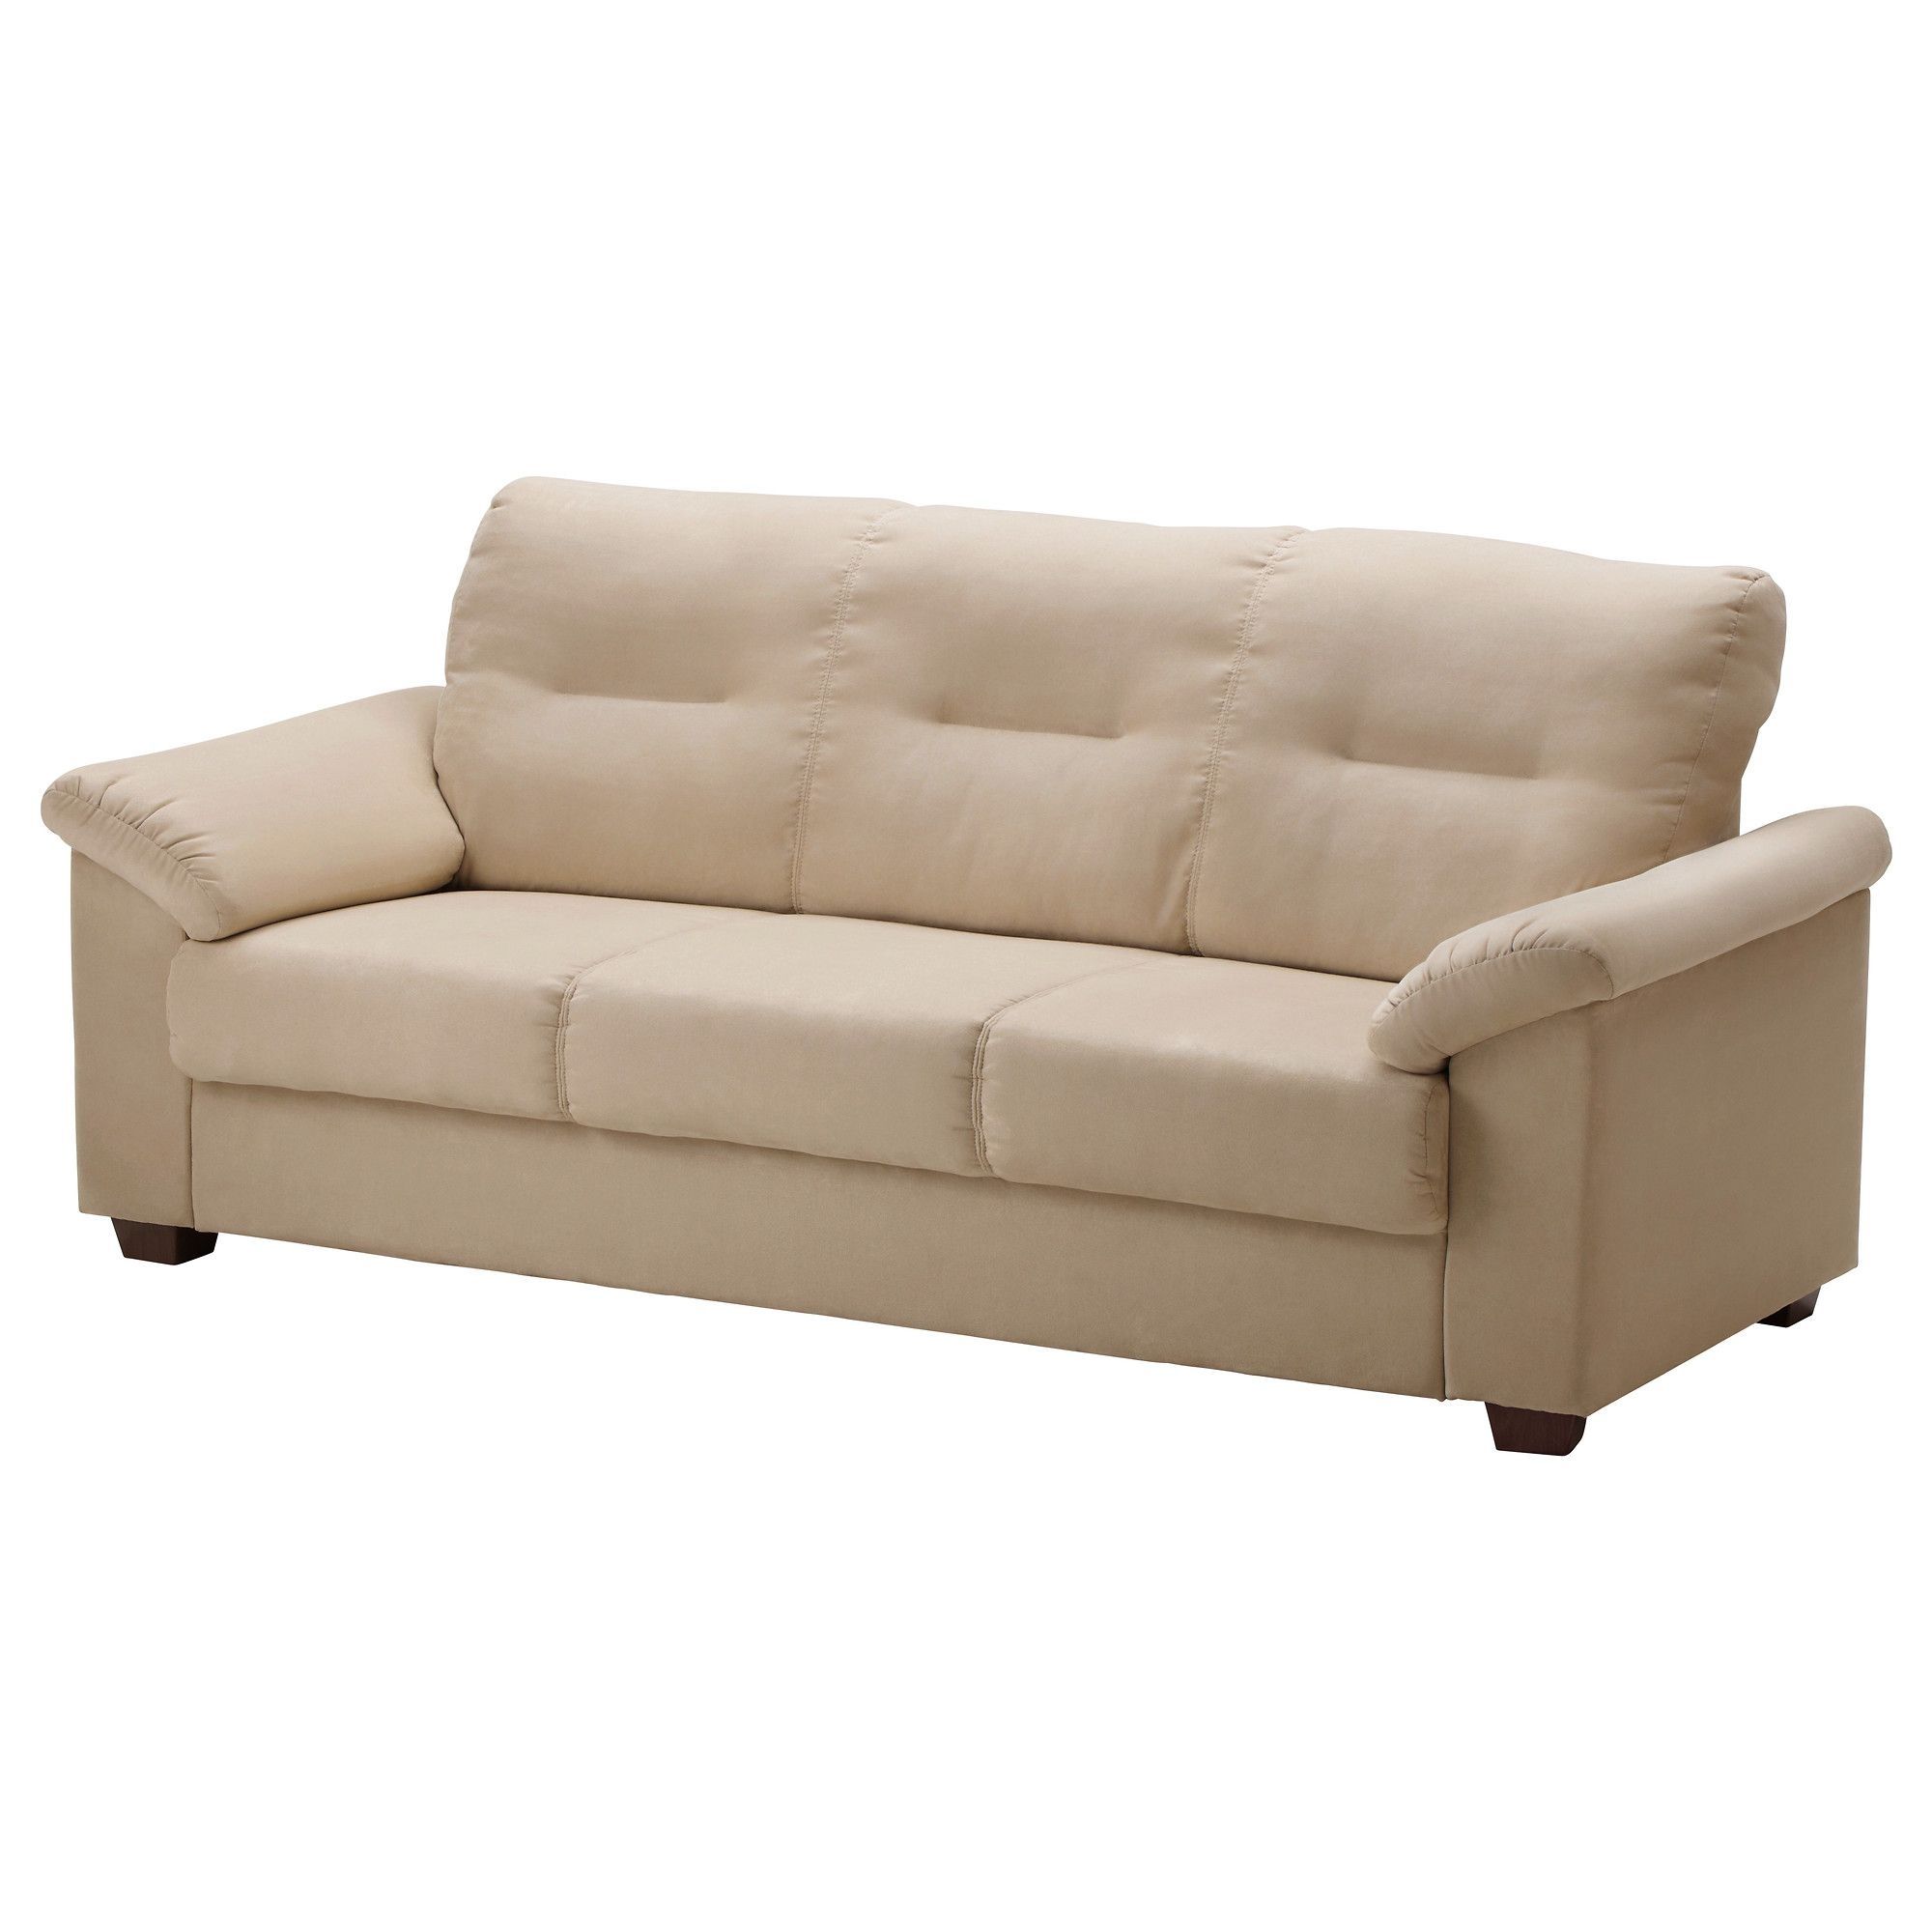 Ikea – Knislinge, Sofa, Kungsvik Sand, , The High Back Provides Good With Regard To Taron 3 Piece Power Reclining Sectionals With Left Facing Console Loveseat (View 2 of 30)